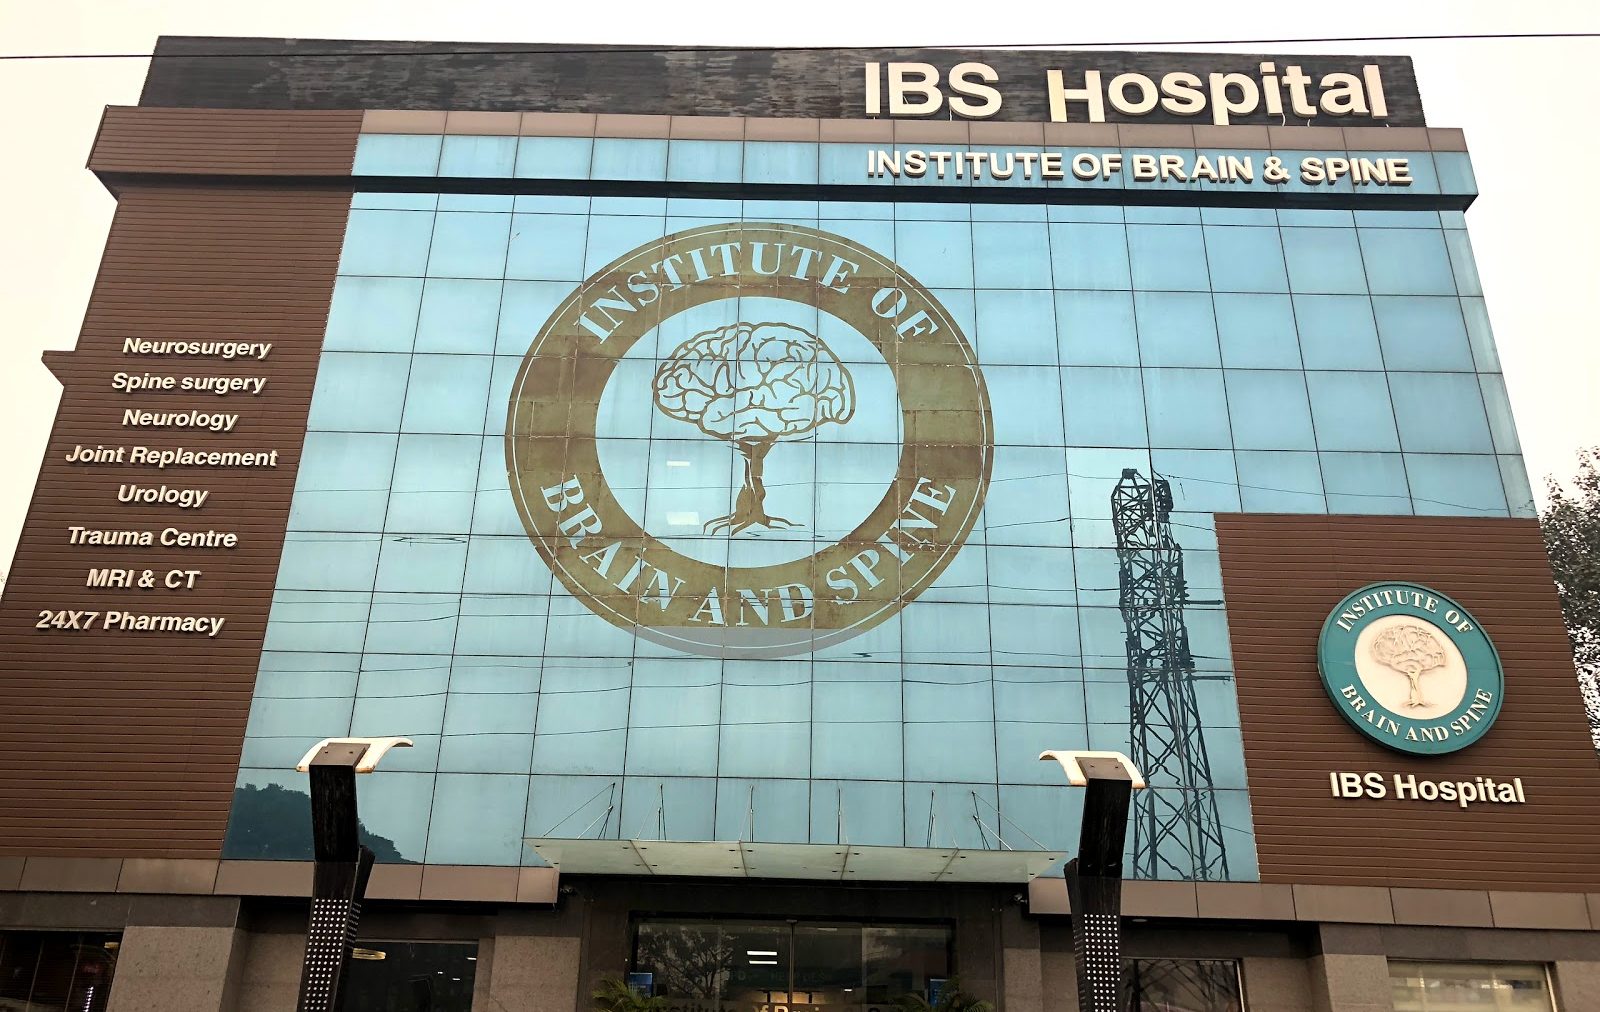 IBS Hospital is the first in India to introduce brain mapping technology